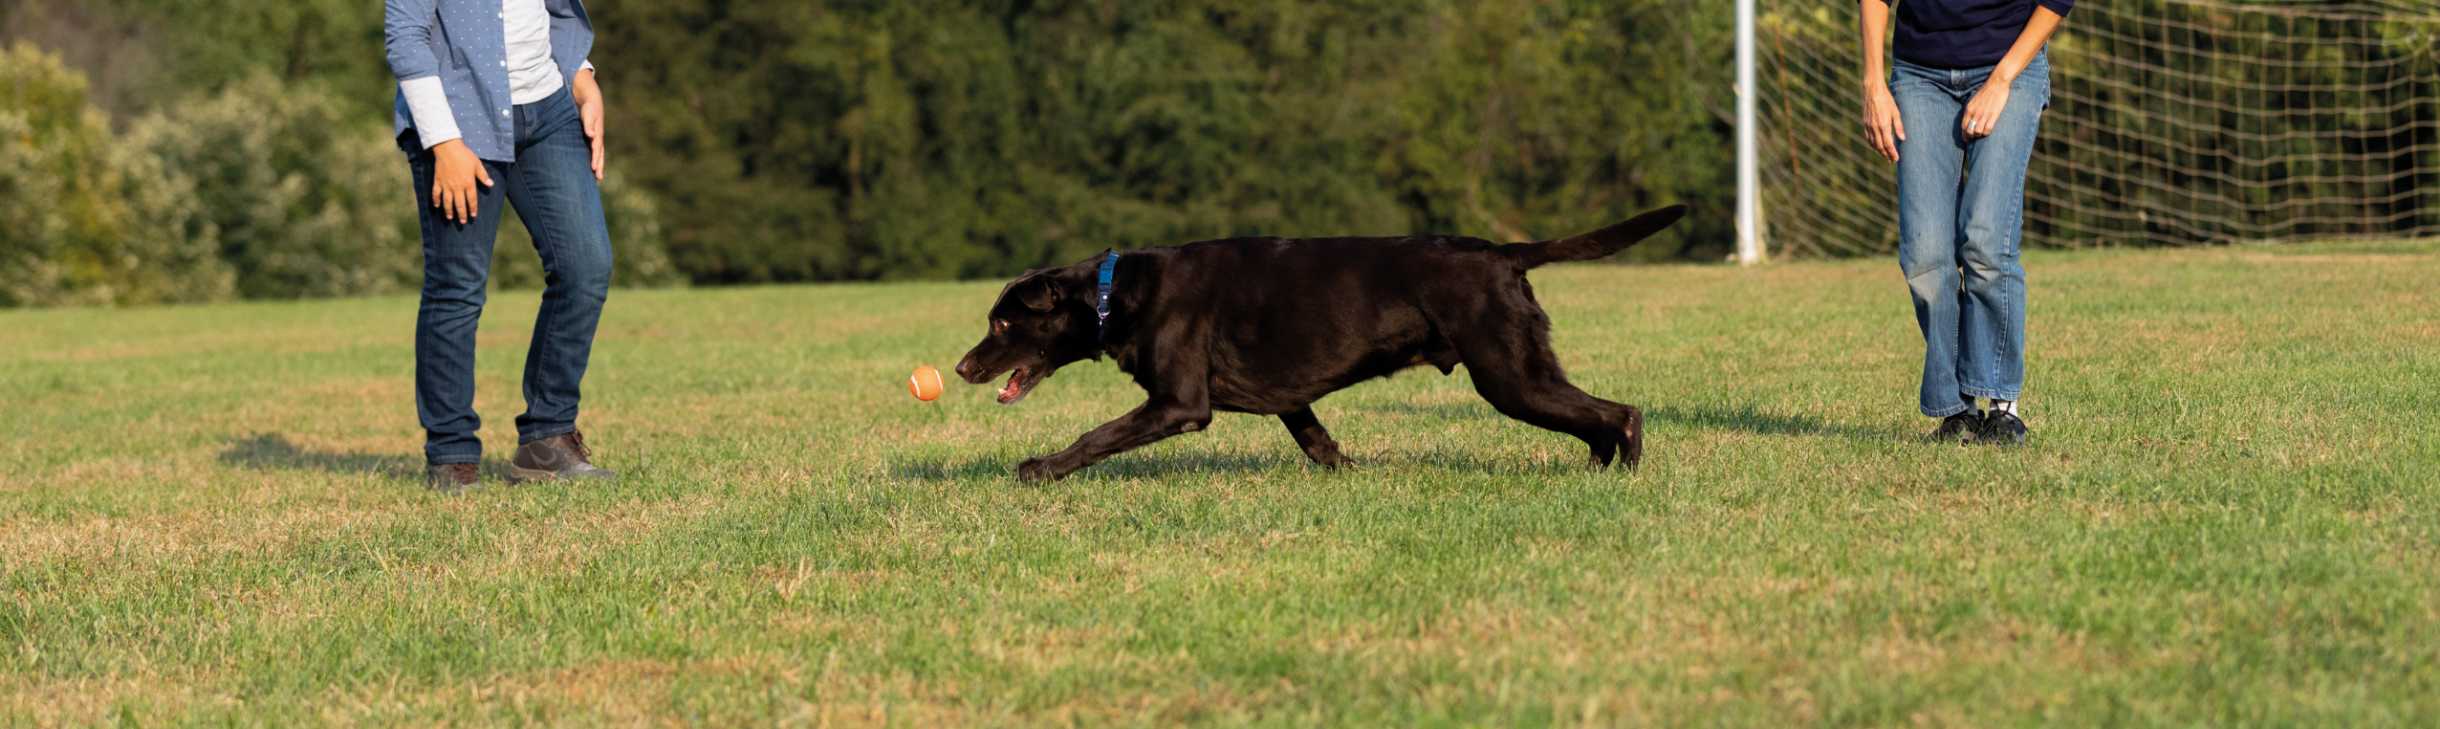 dog chasing after a ball in a field